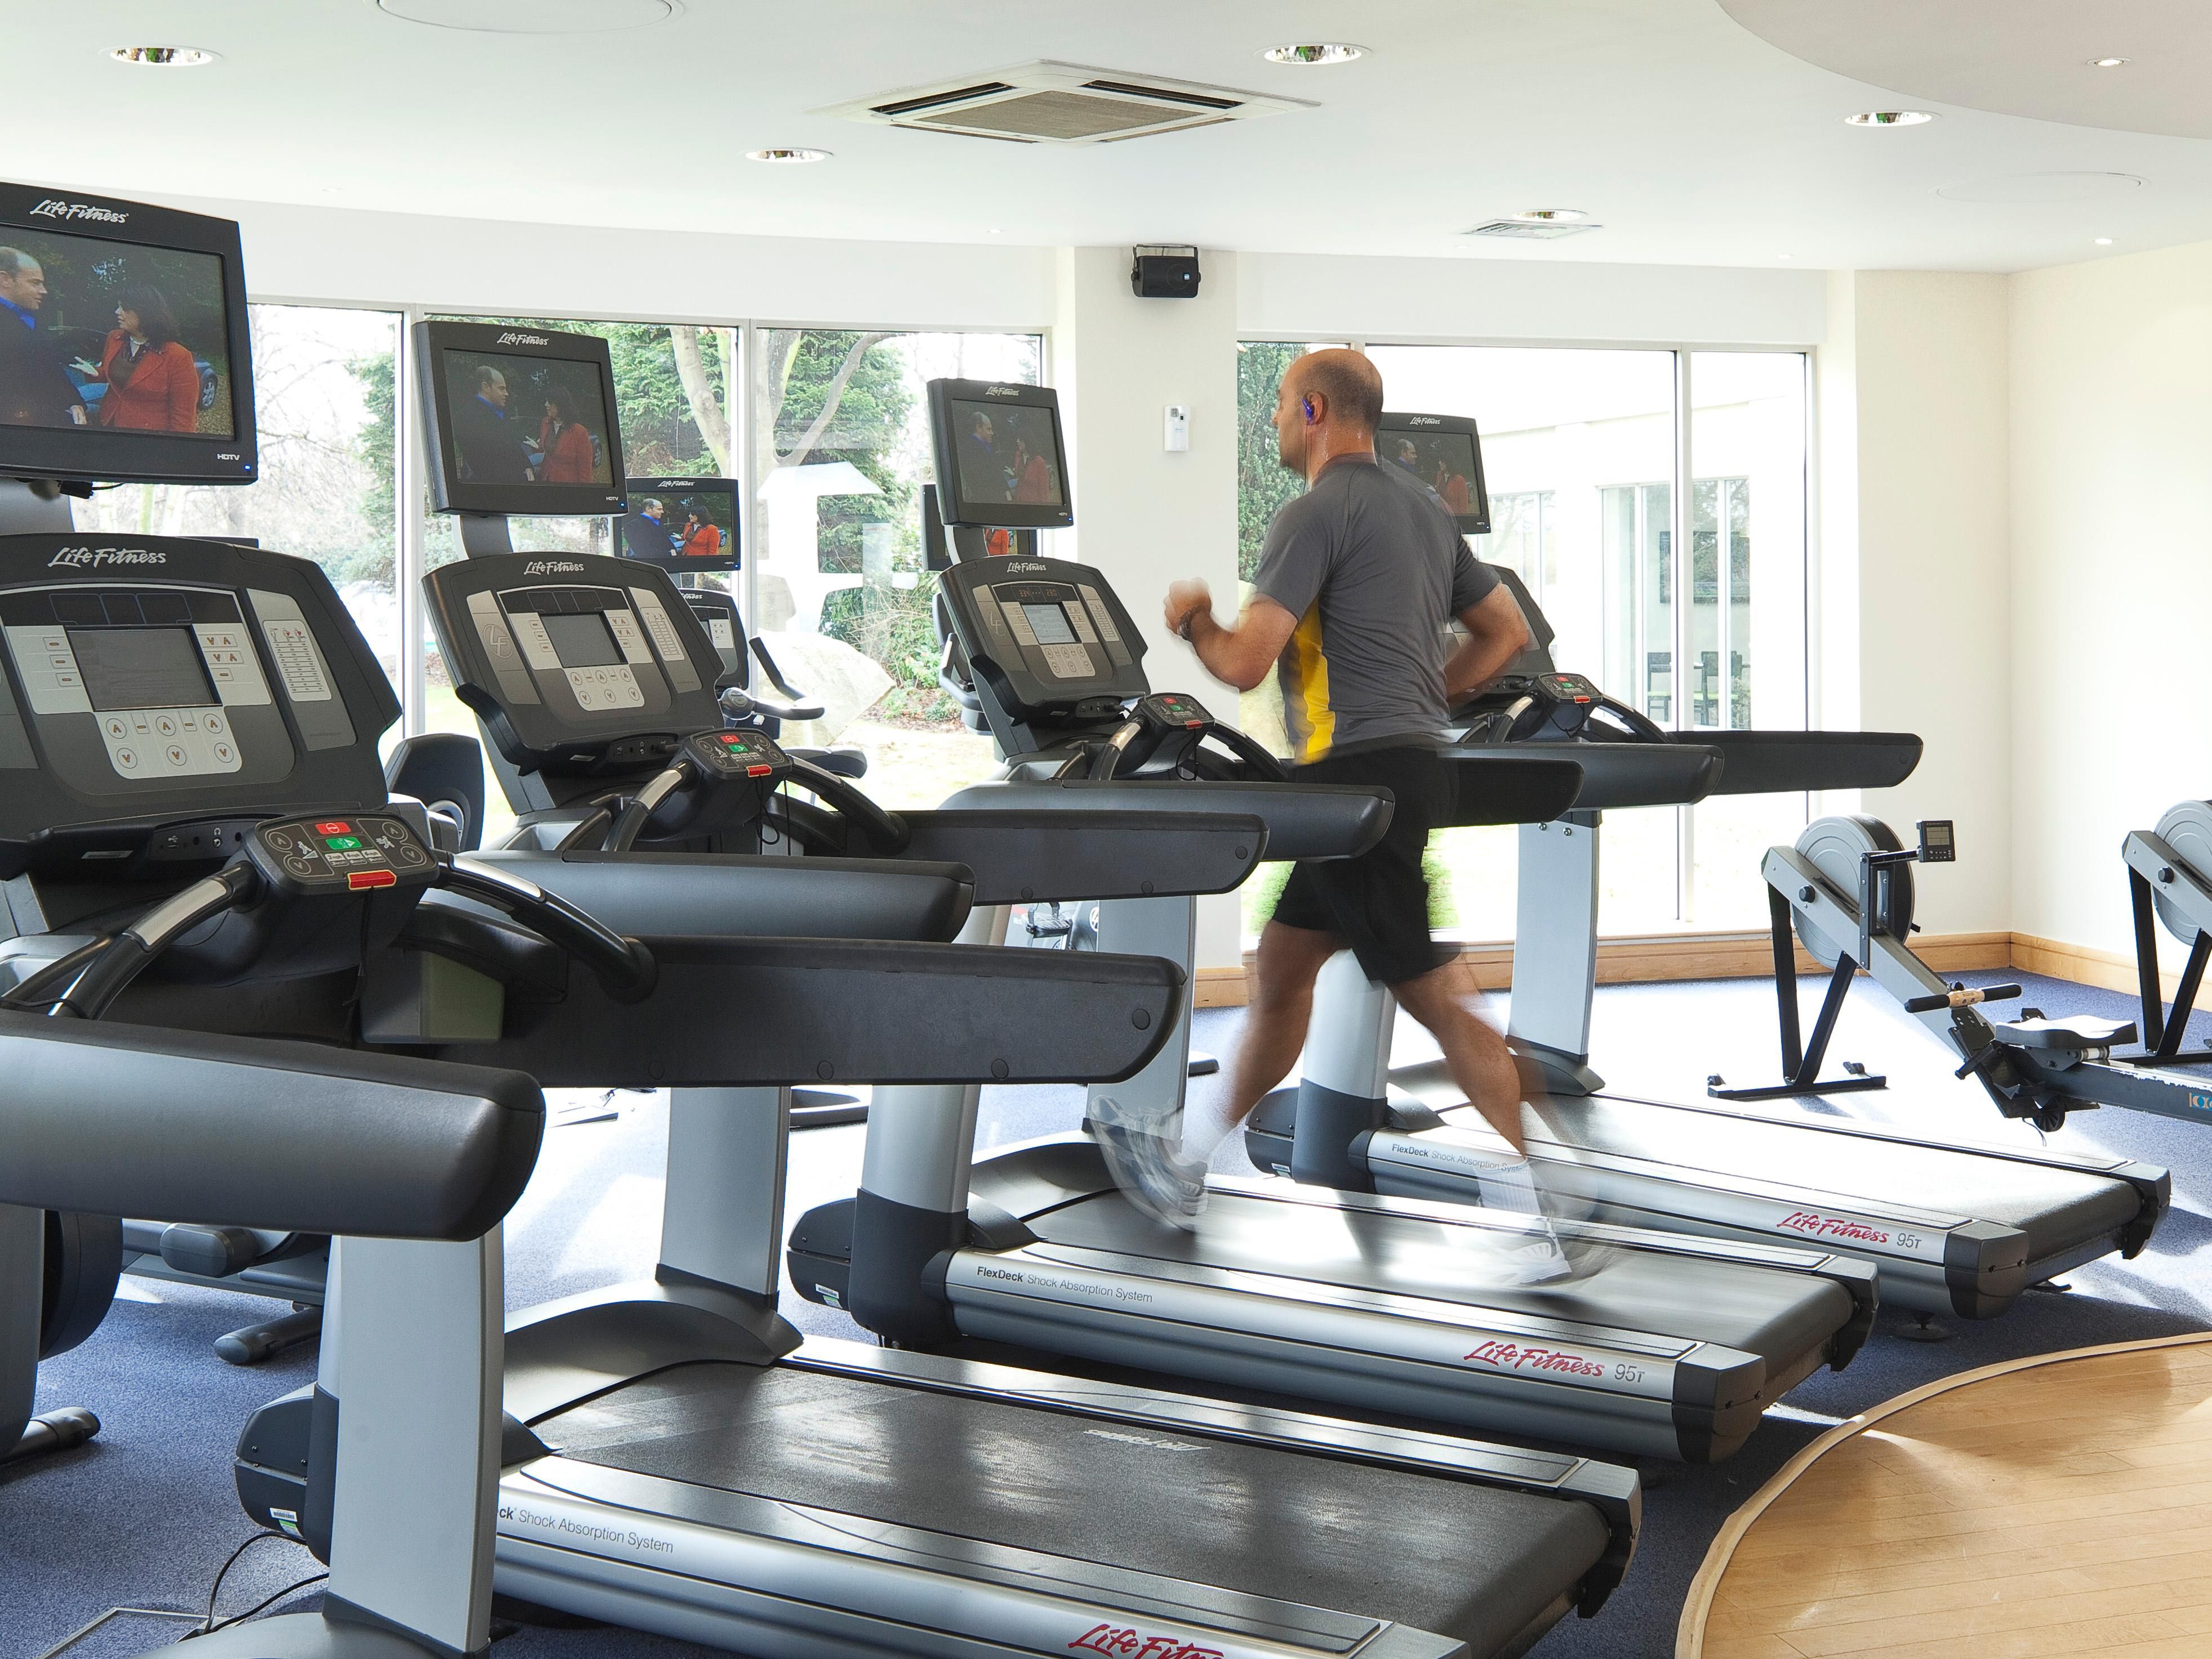 Our gym offers a range of cardio equipment and free weights and is complimentary for all hotel guests to use. 

